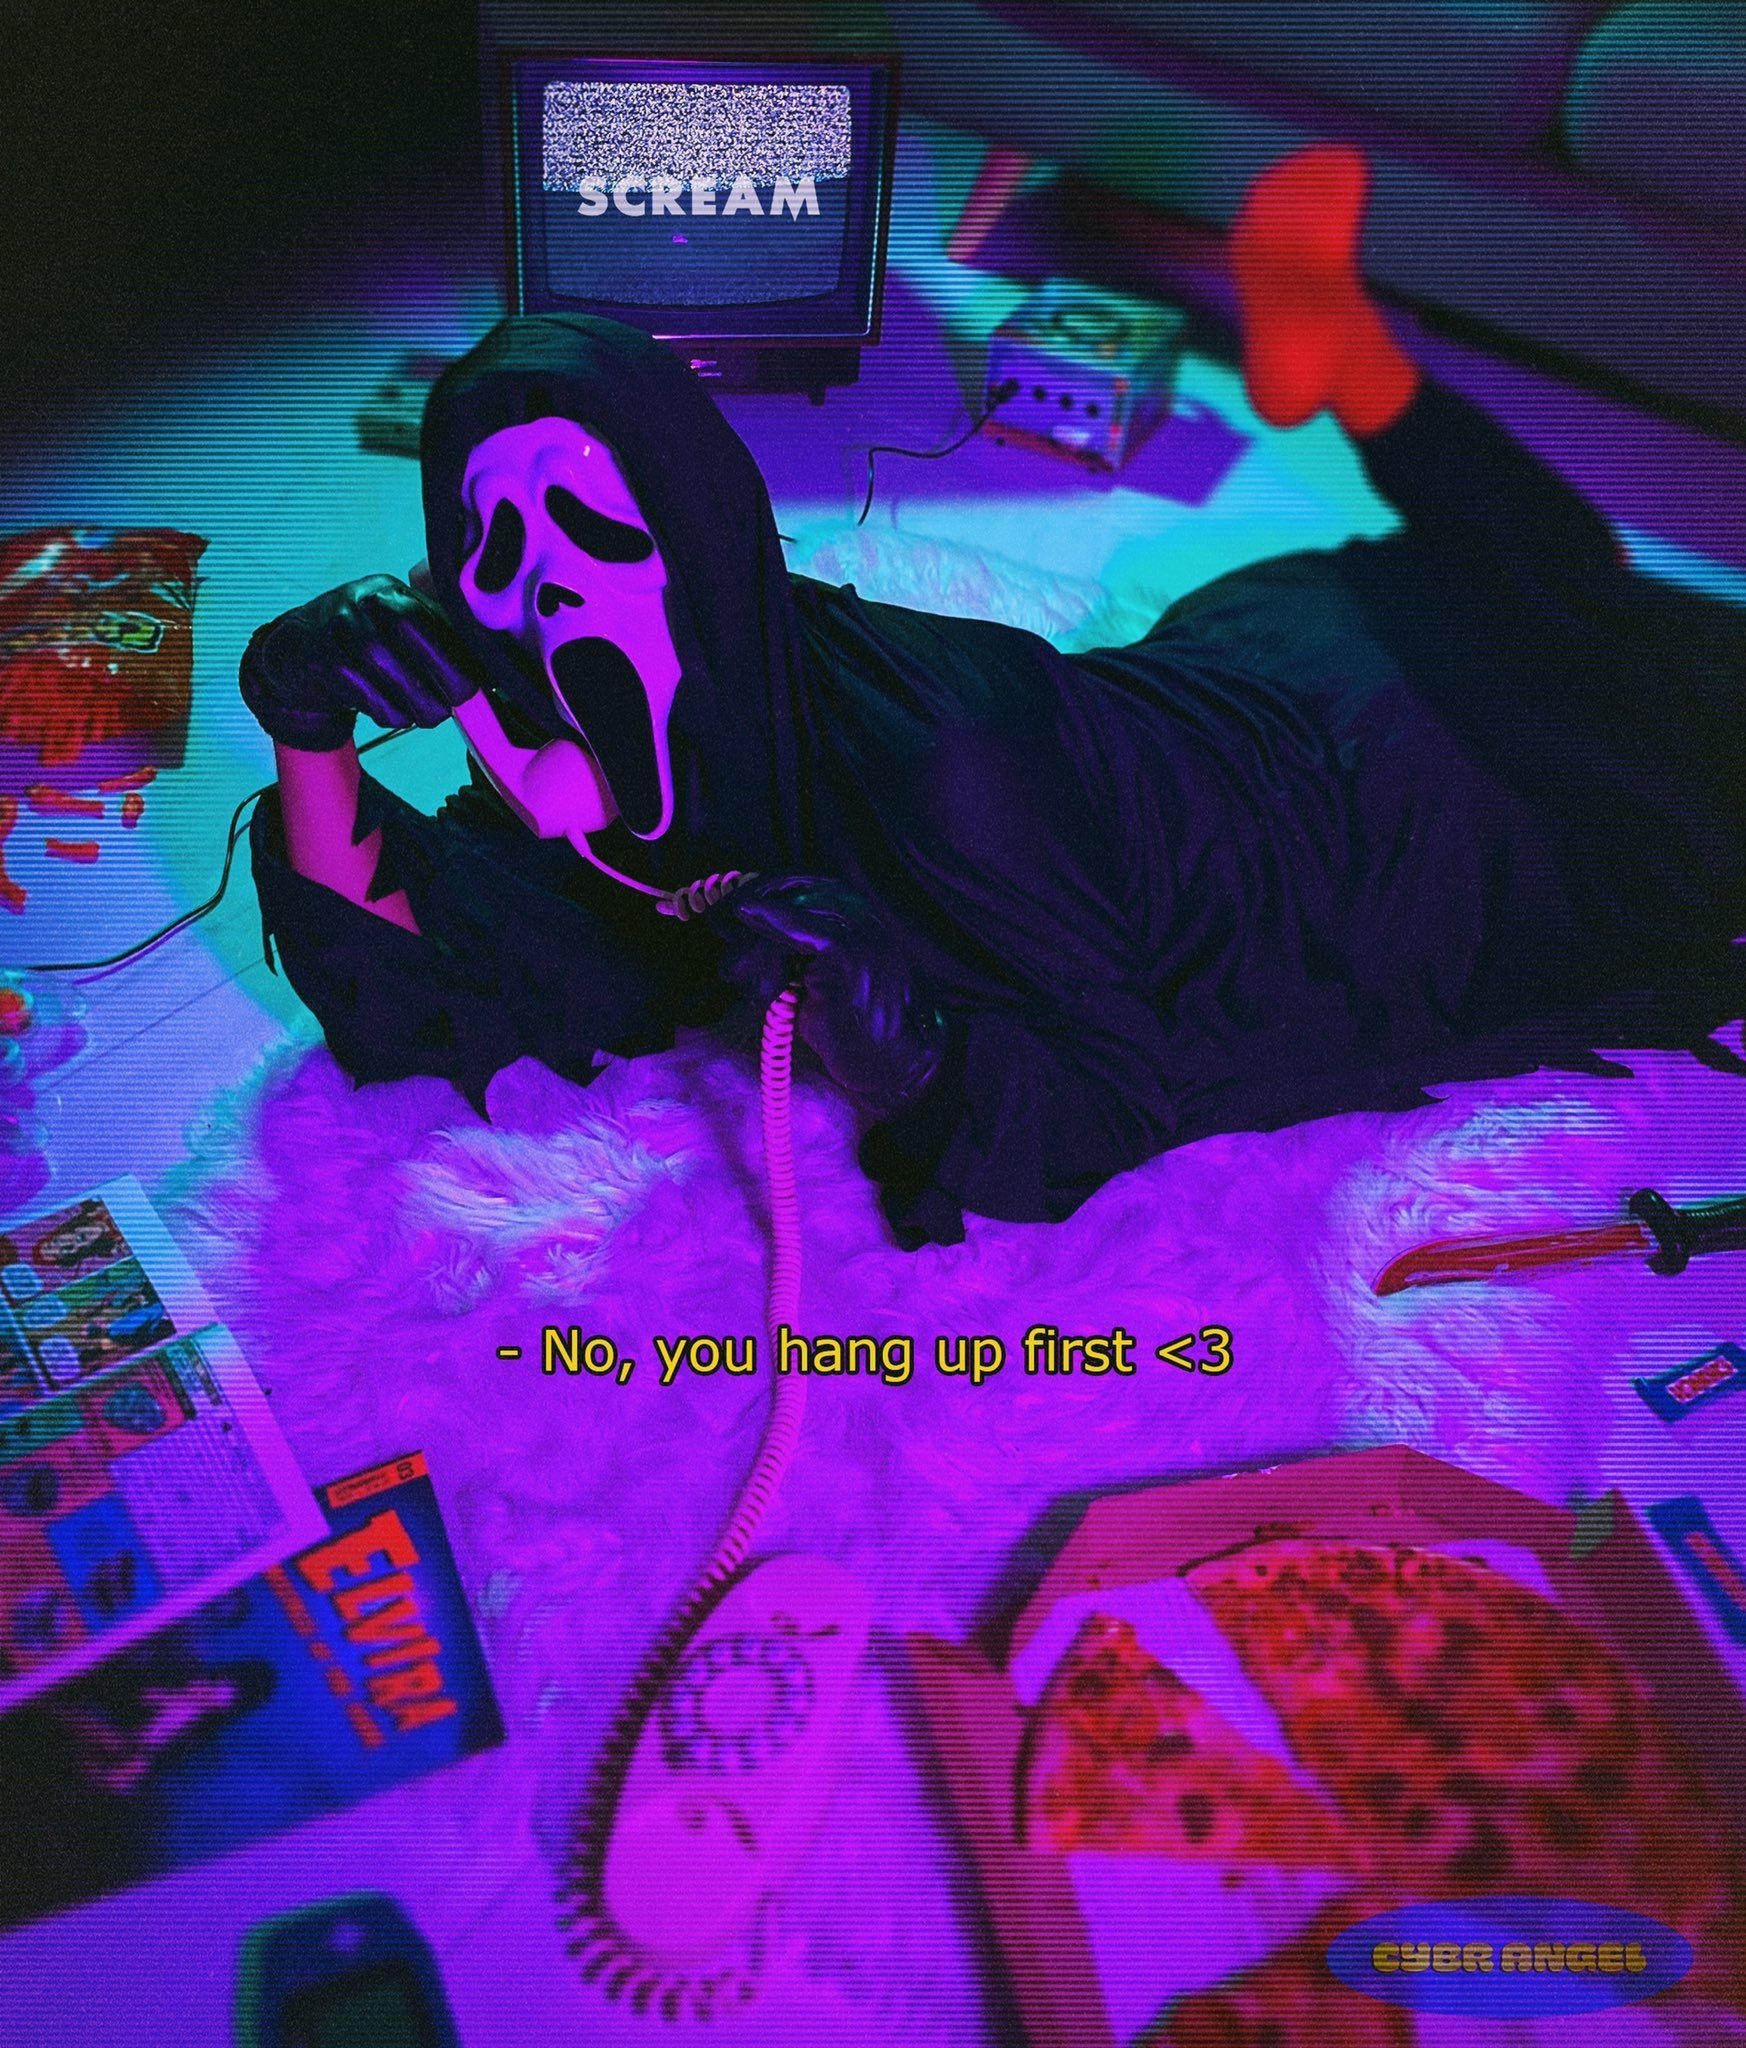 A person in a mask laying on a bed - Ghostface